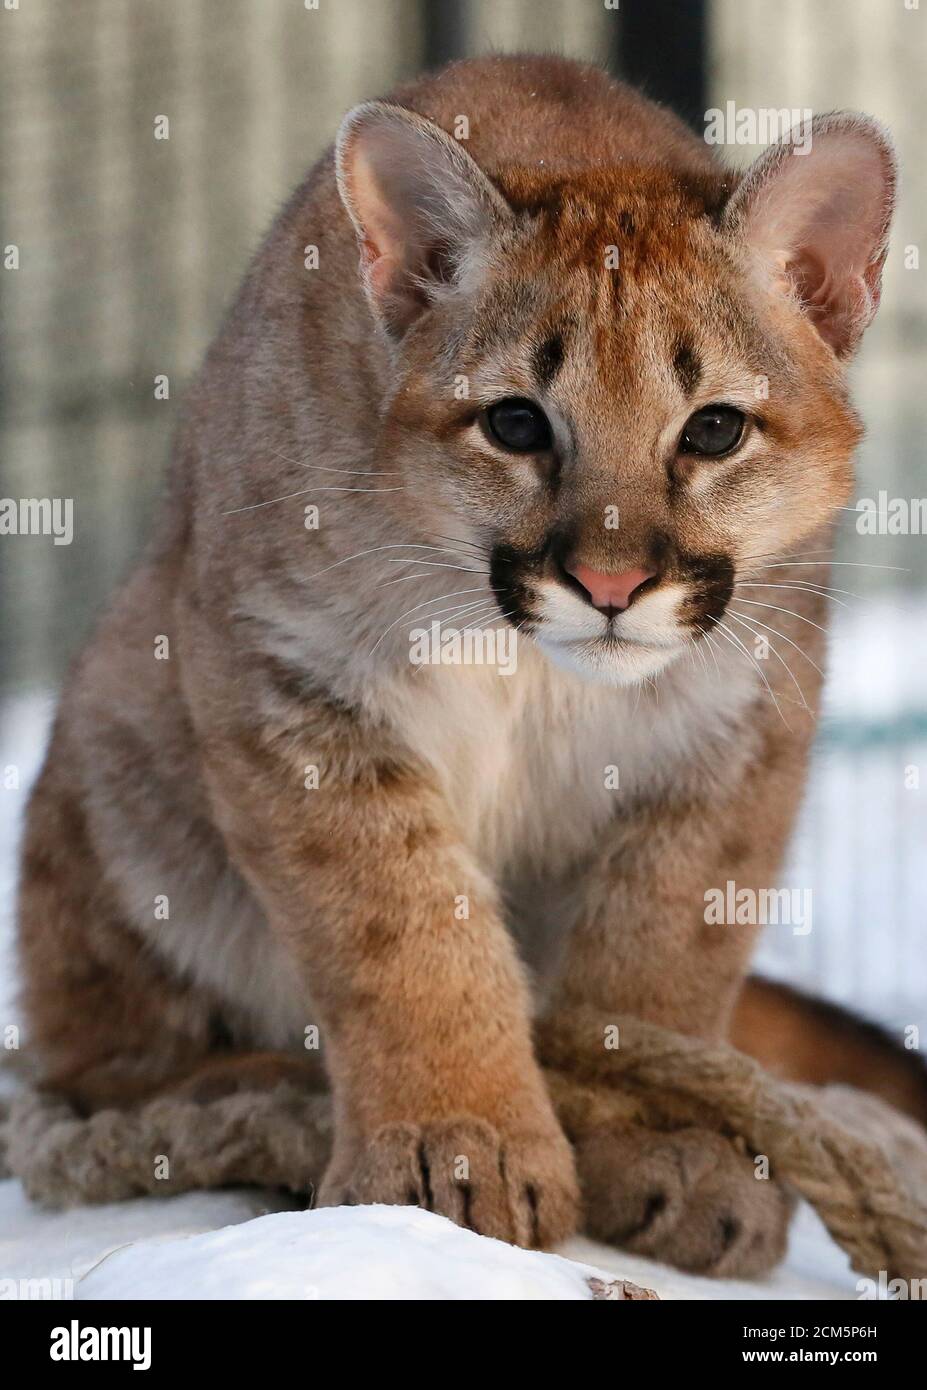 A four-month-old North American cougar cub looks on inside its open-air  enclosure in the Royev Ruchey zoo on the suburbs of the Siberian city of  Krasnoyarsk, Russia, February 11, 2016. Cougars Ice